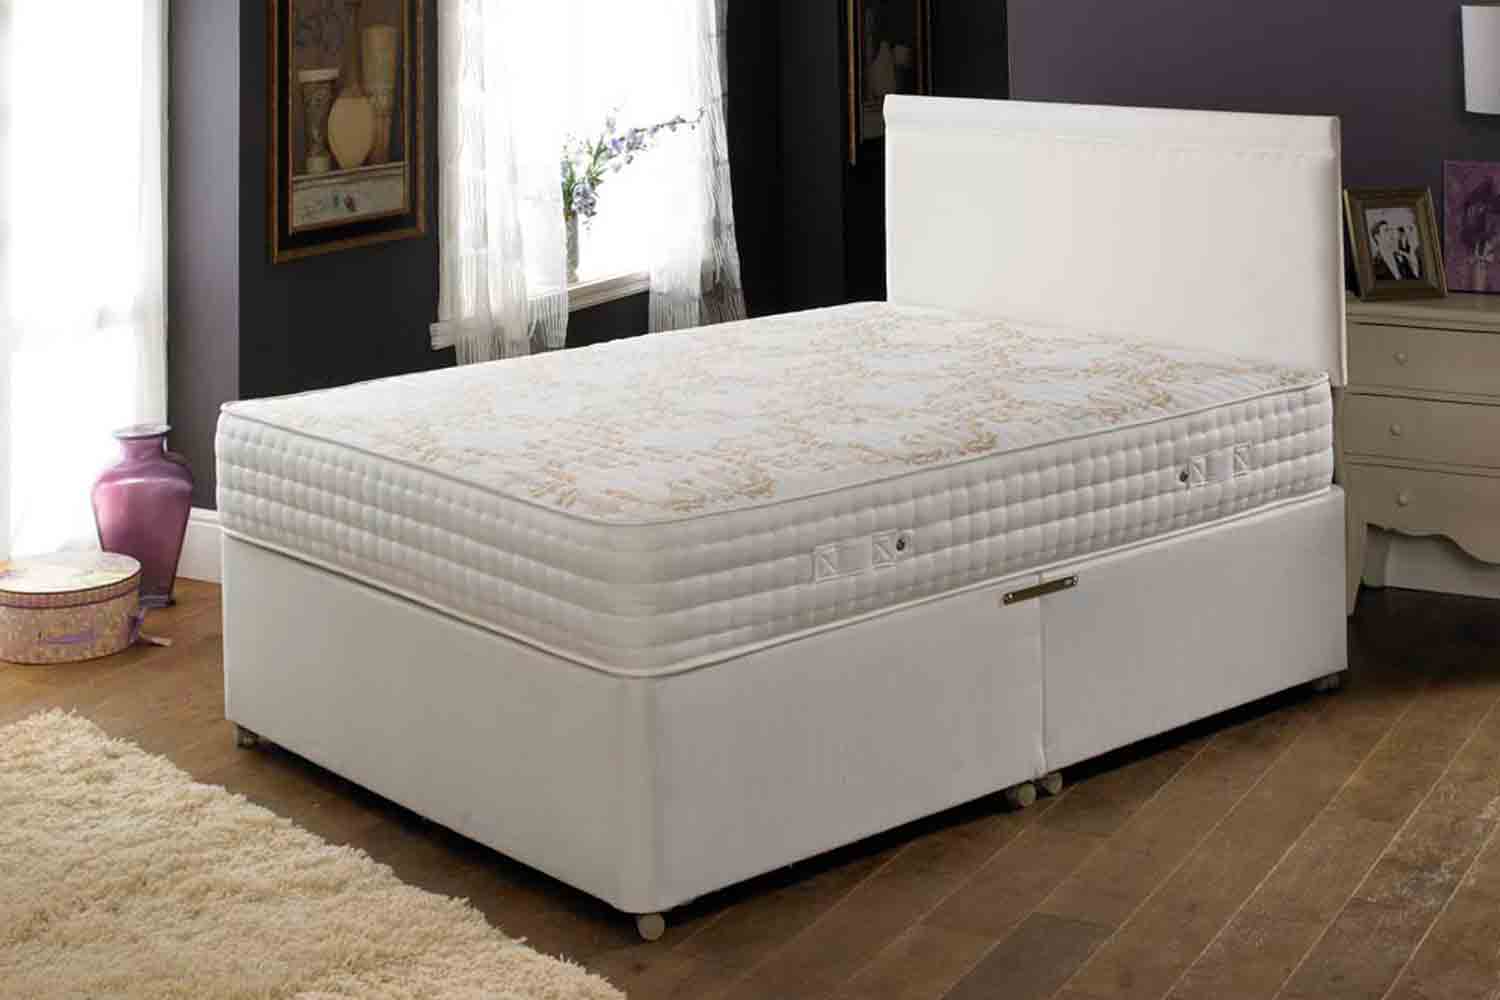 Joseph Crown Imperial Divan Bed-King Size-4 Drawers